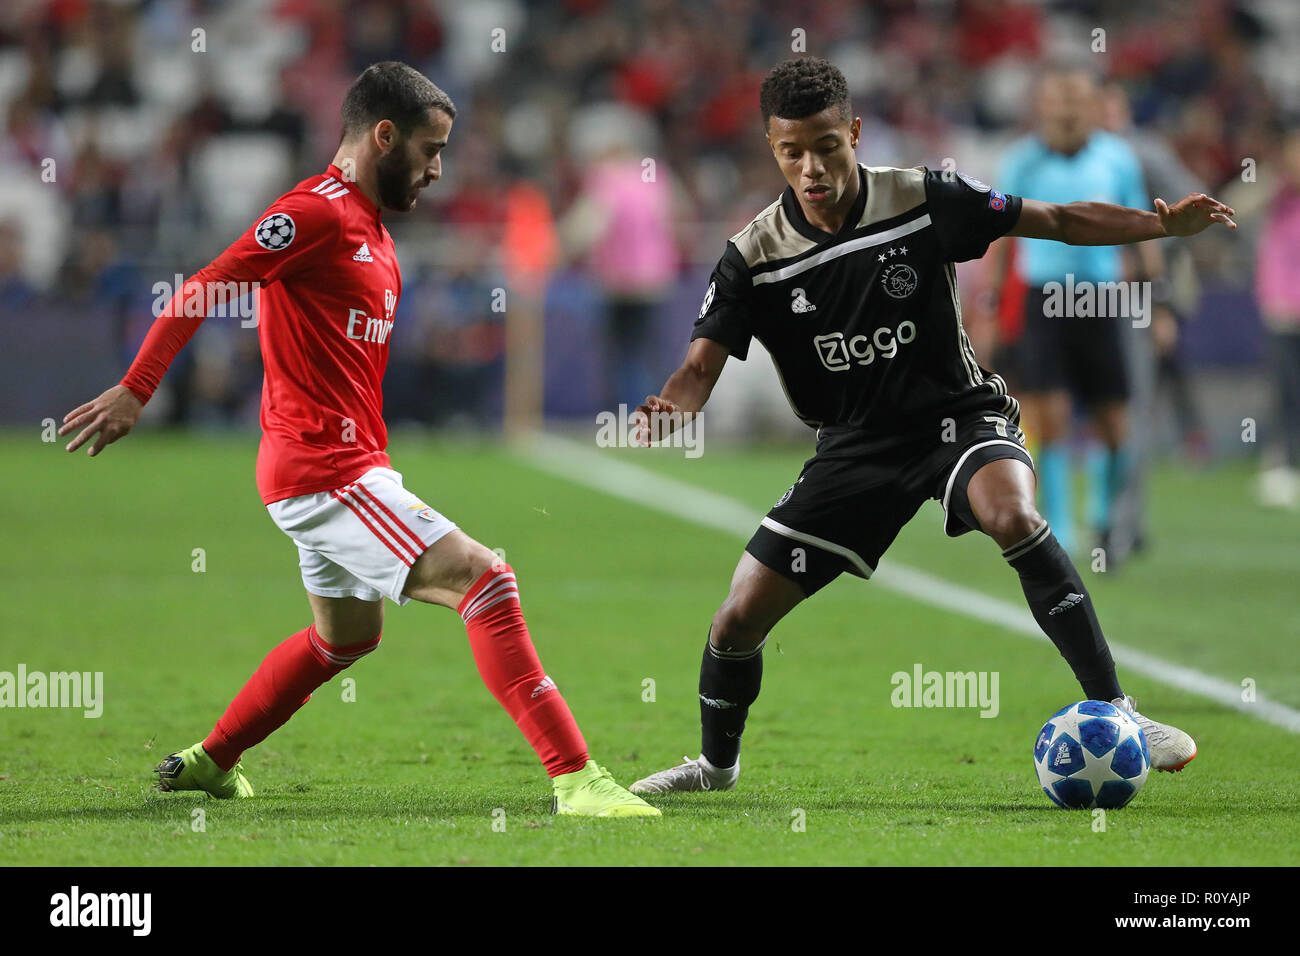 Lisbon, Portugal, Portugal. 7th Nov, 2018. Rafa Silva of SL Benfica (L) vies for the ball with David Neves of FC Ajax (R) during the UEFA Champions League 2018/19 football match between SL Benfica vs FC Ajax. Credit: David Martins/SOPA Images/ZUMA Wire/Alamy Live News Stock Photo